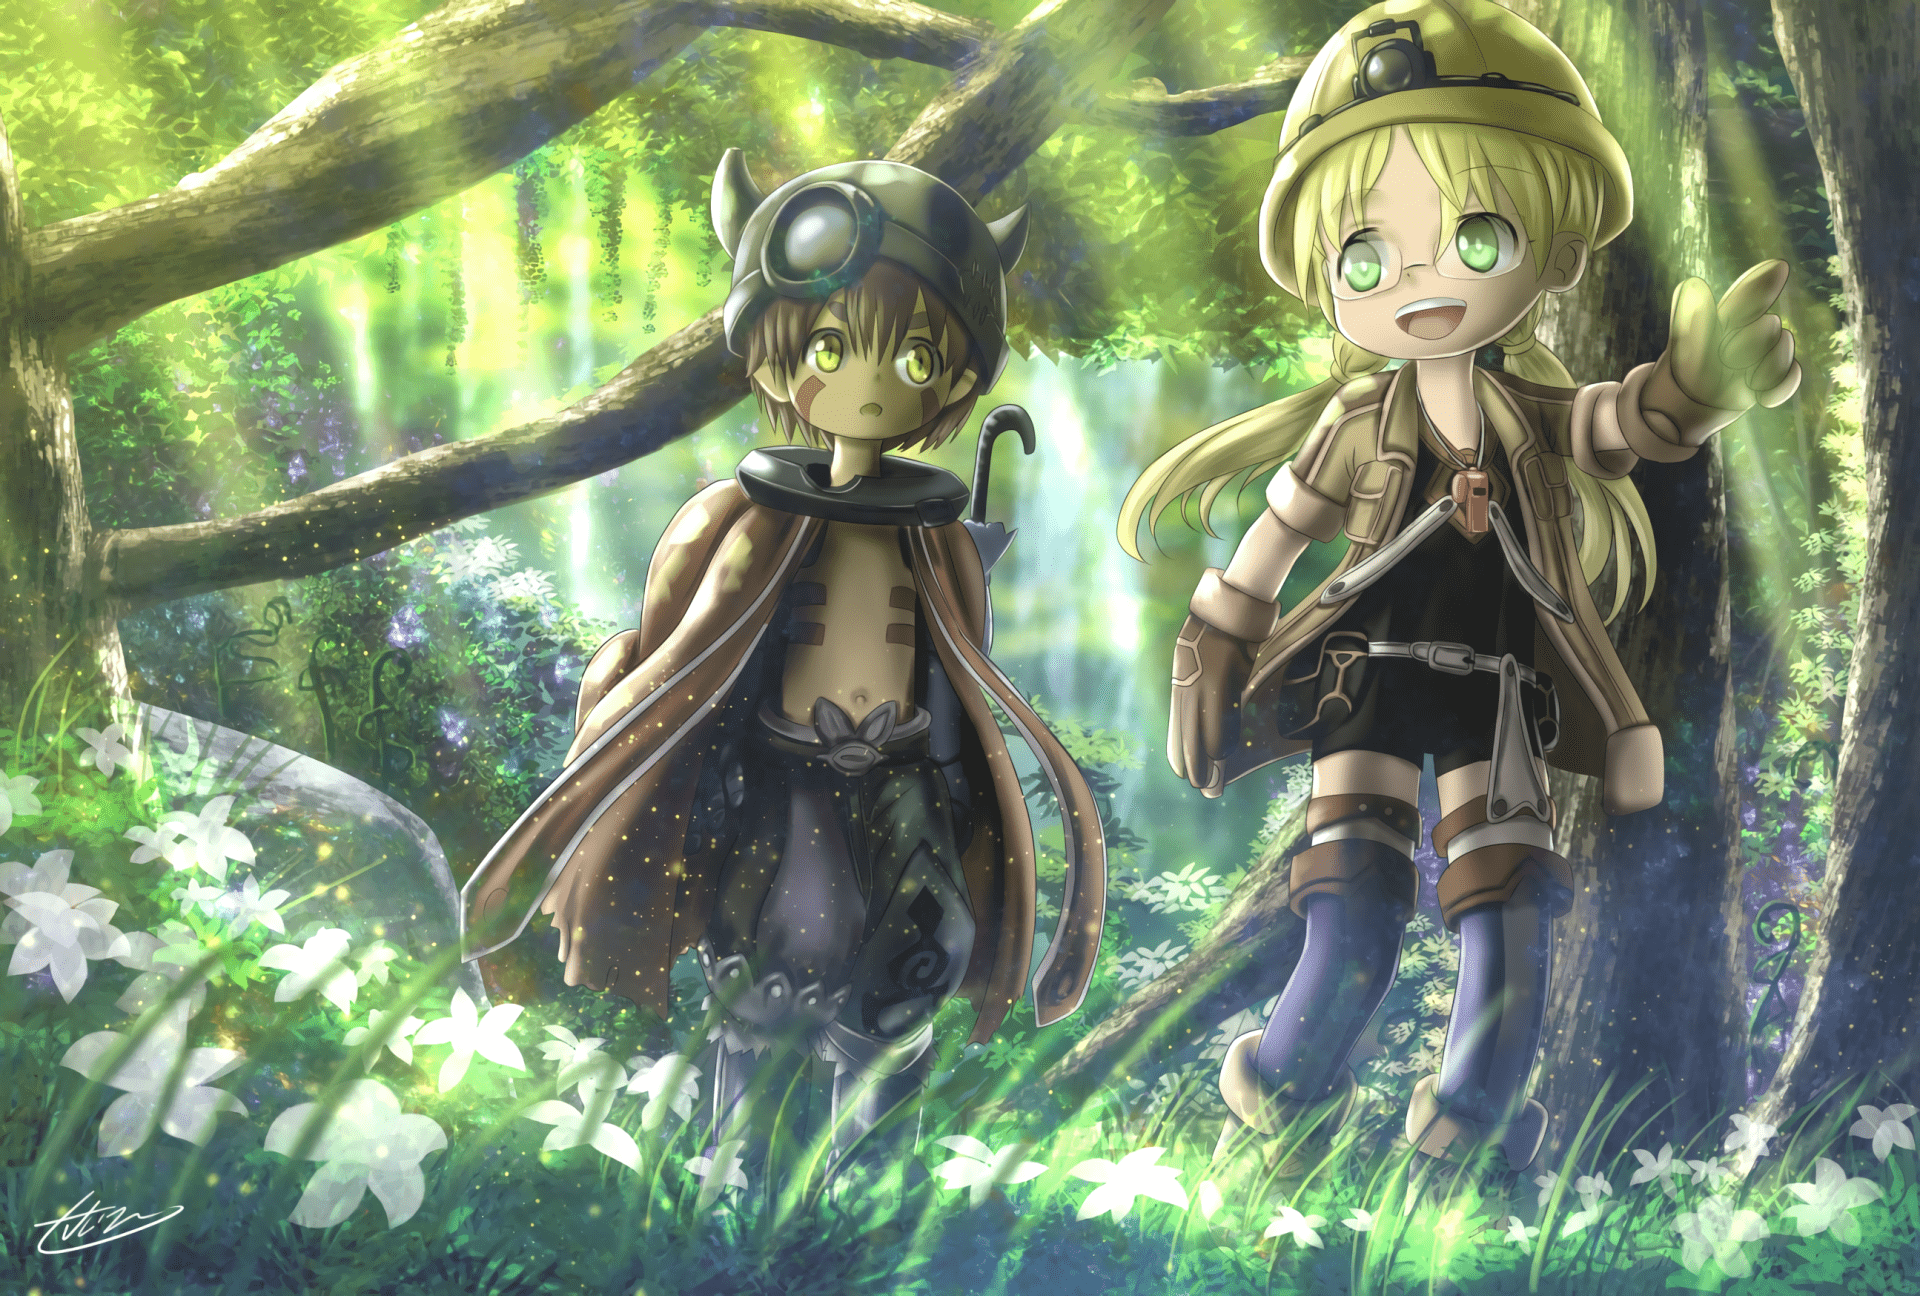 First Made in Abyss Anime Exhibition to Open at Ikebukuro and Nagoya  PARCO  MOSHI MOSHI NIPPON  もしもしにっぽん